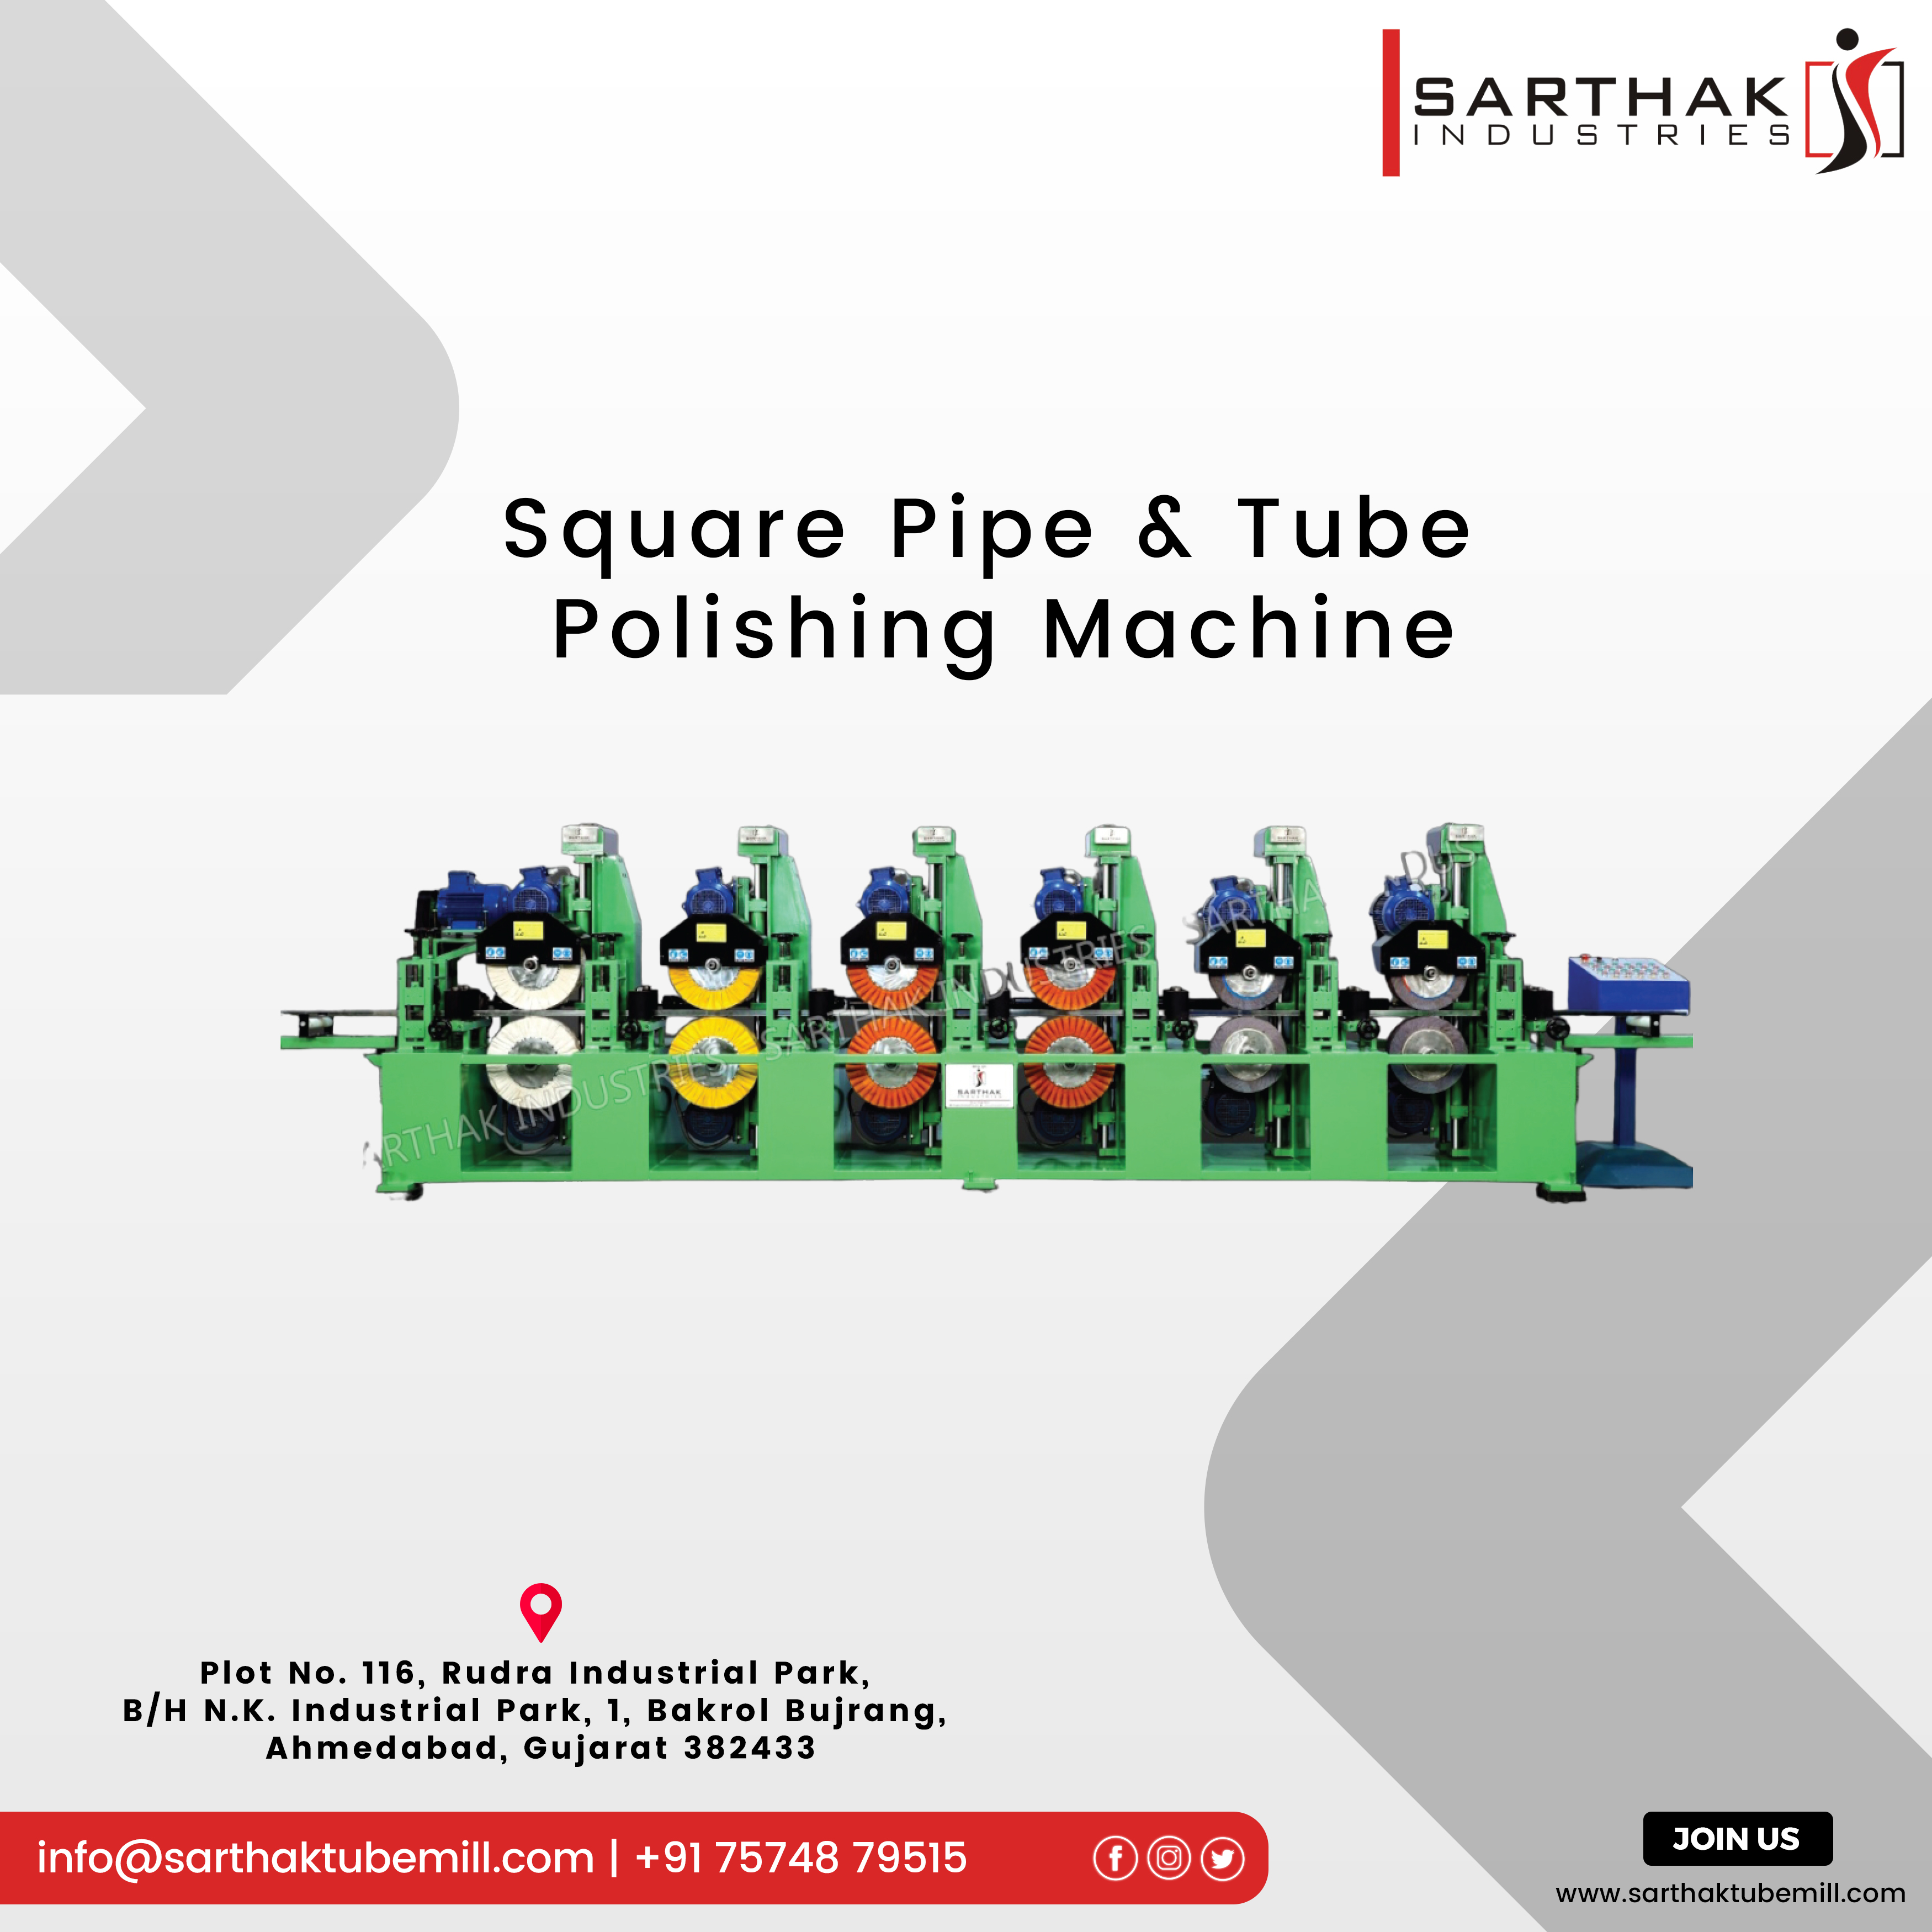 Looking for high-quality SS pipe polishing machines in Ahmedabad, India?